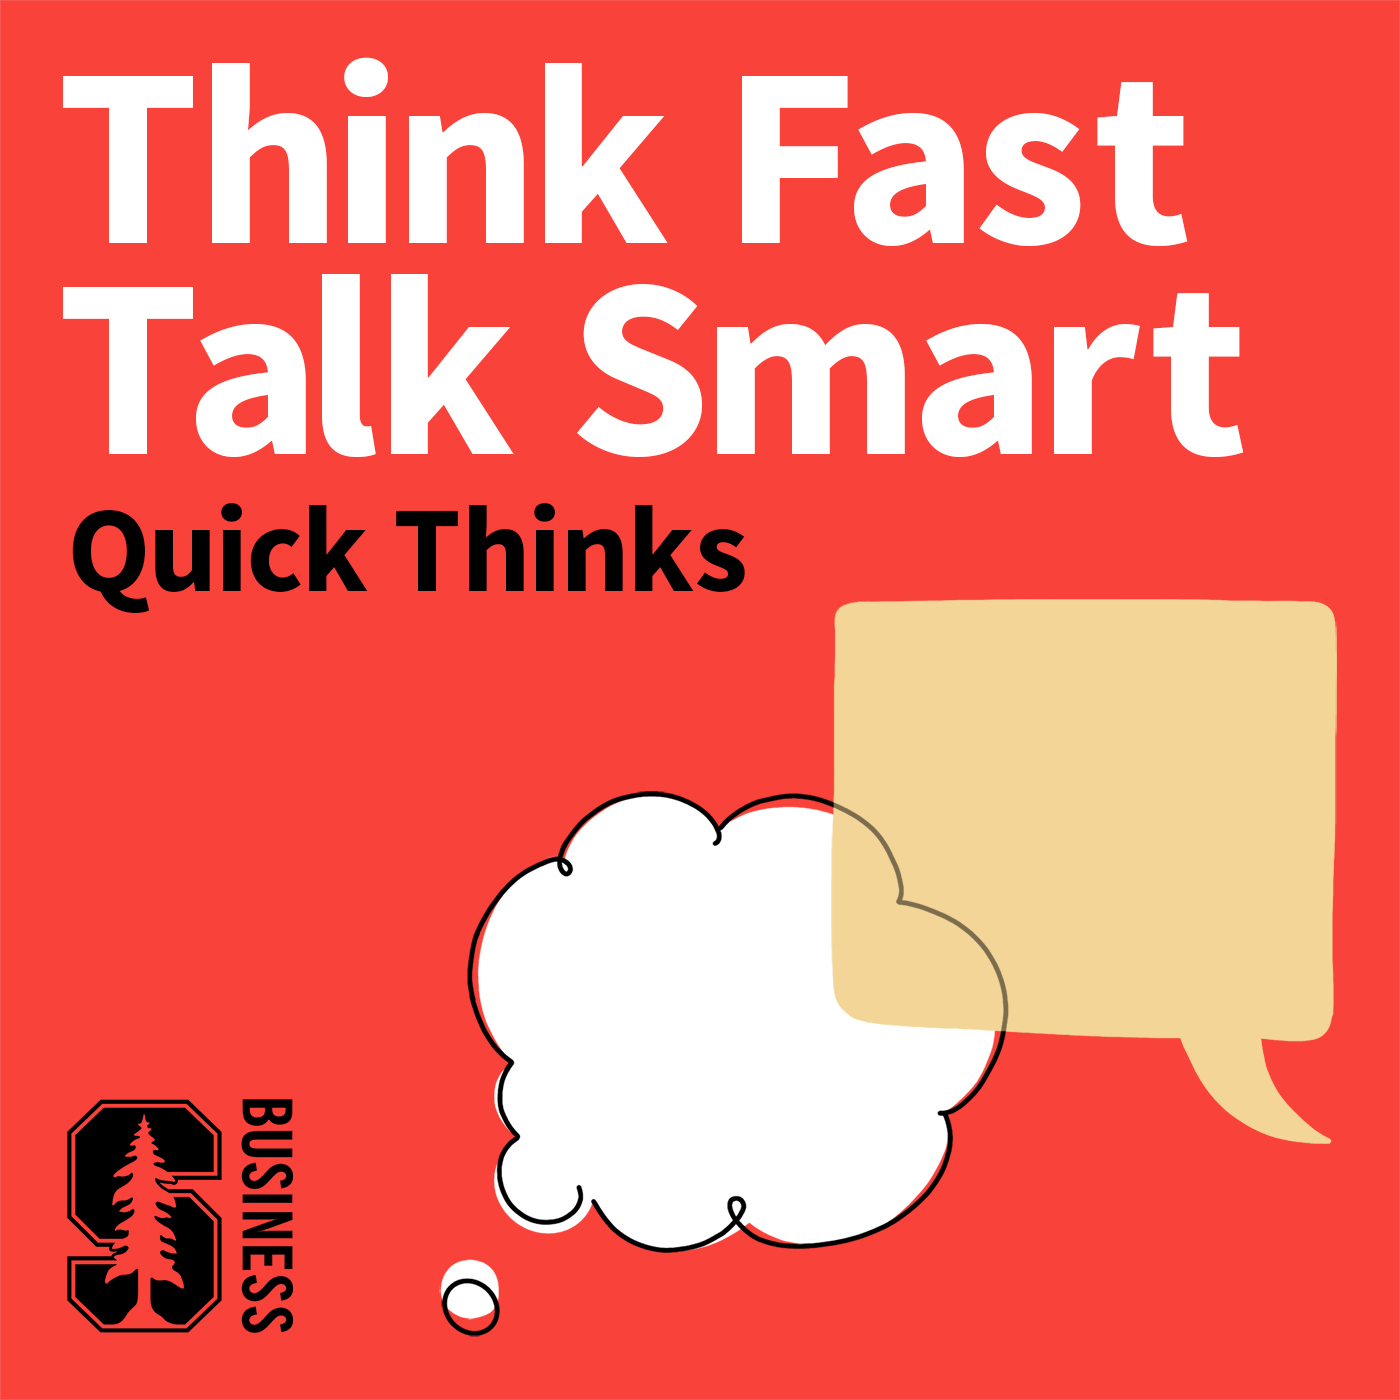 16. Quick Think: How to Craft Your Body Language When Confronting Objections